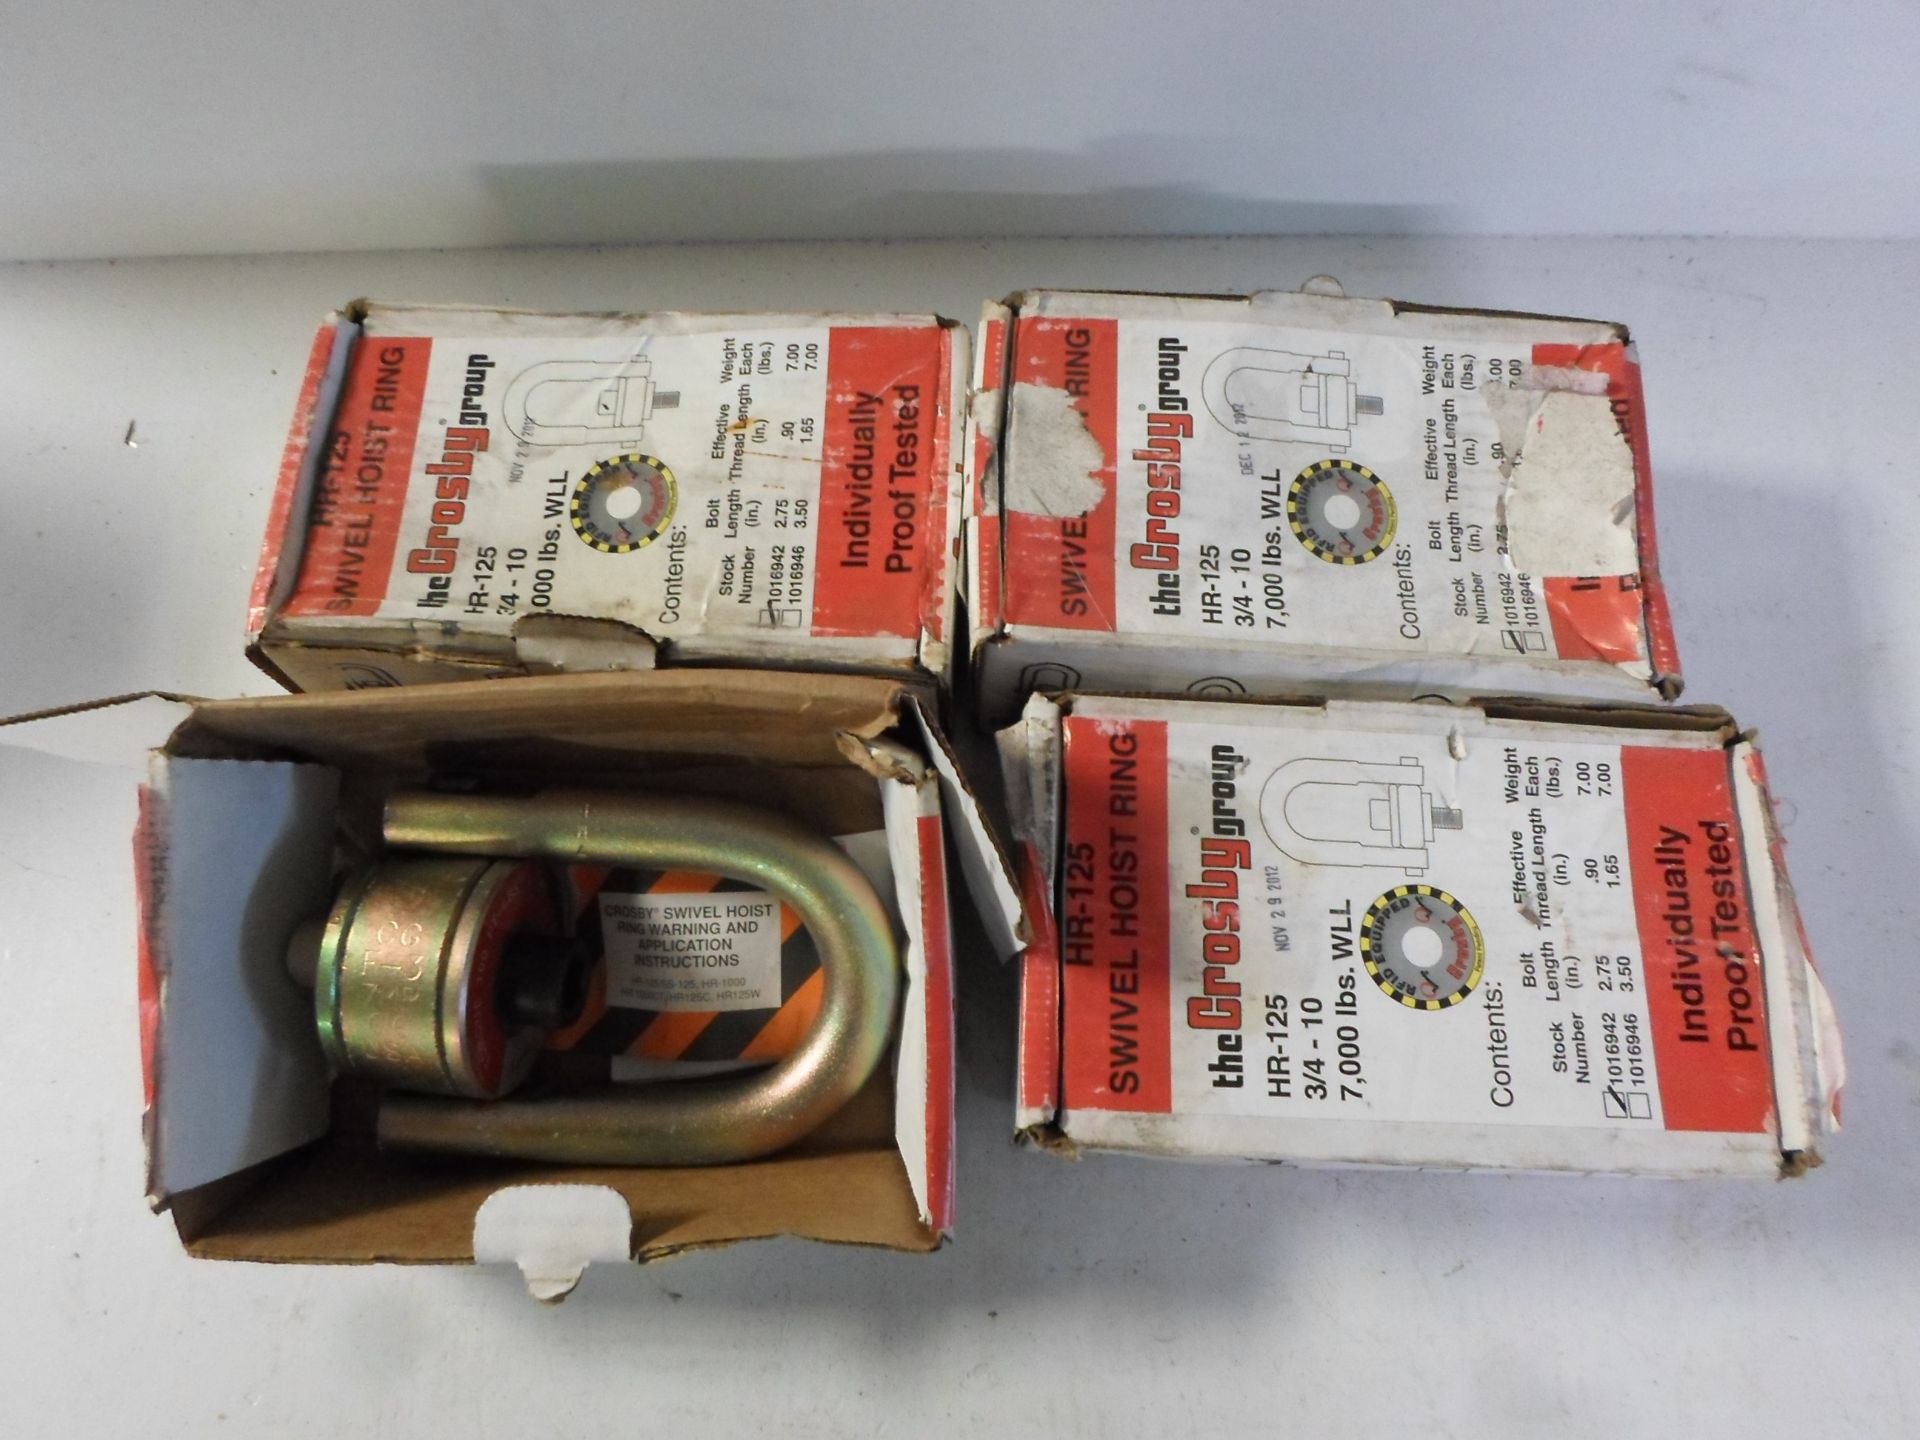 LOT OF FOUR SWIVEL HOIST RING HR-125 THE CROSBY GROUP 7,000 LBS ON IN EACH BOX